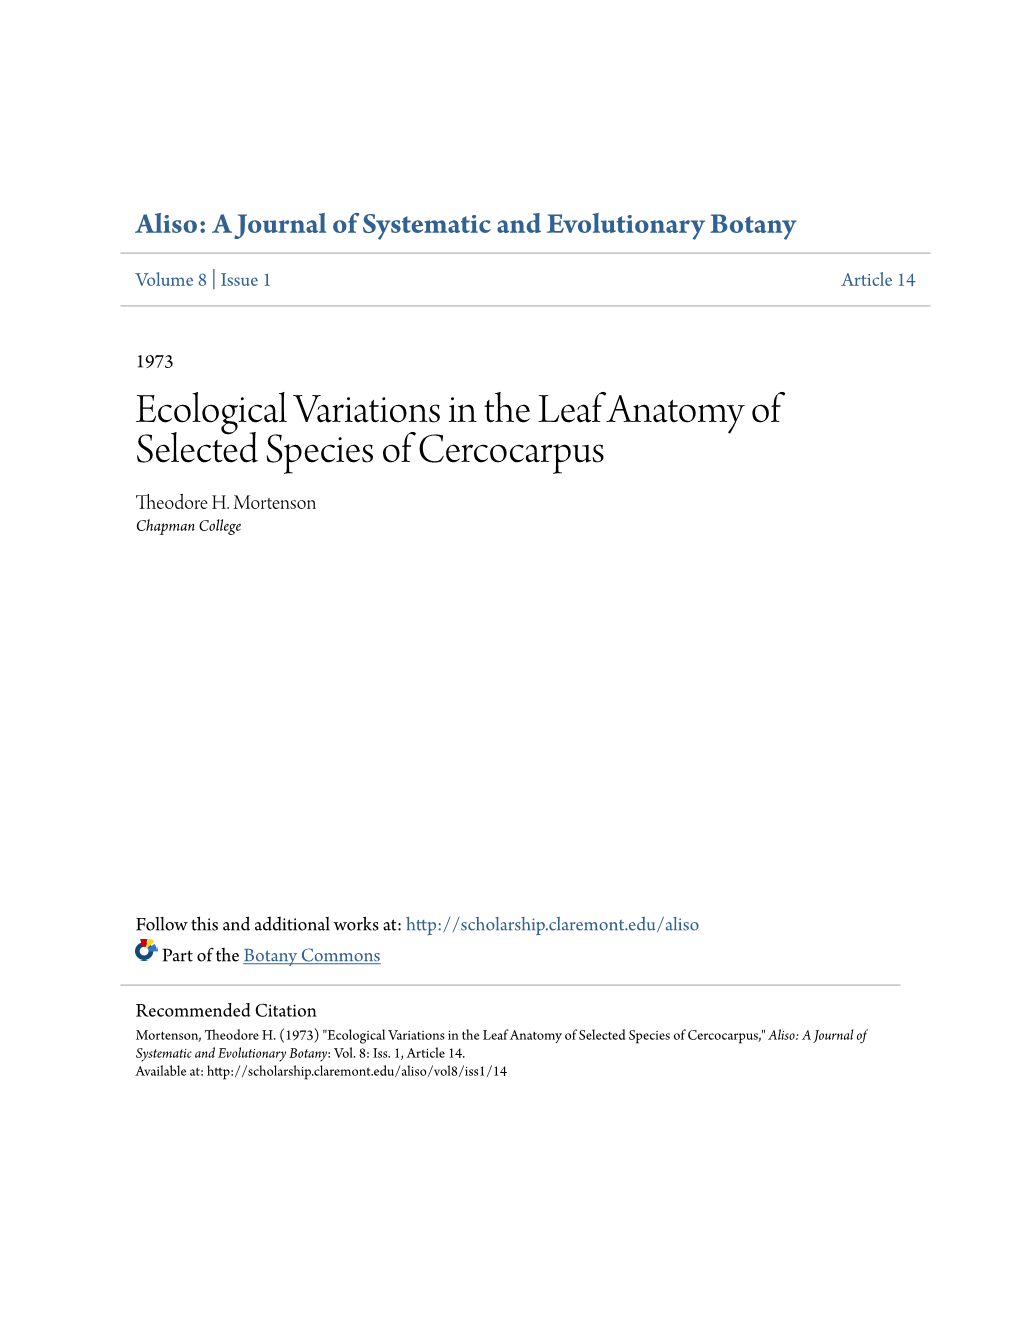 Ecological Variations in the Leaf Anatomy of Selected Species of Cercocarpus Theodore H